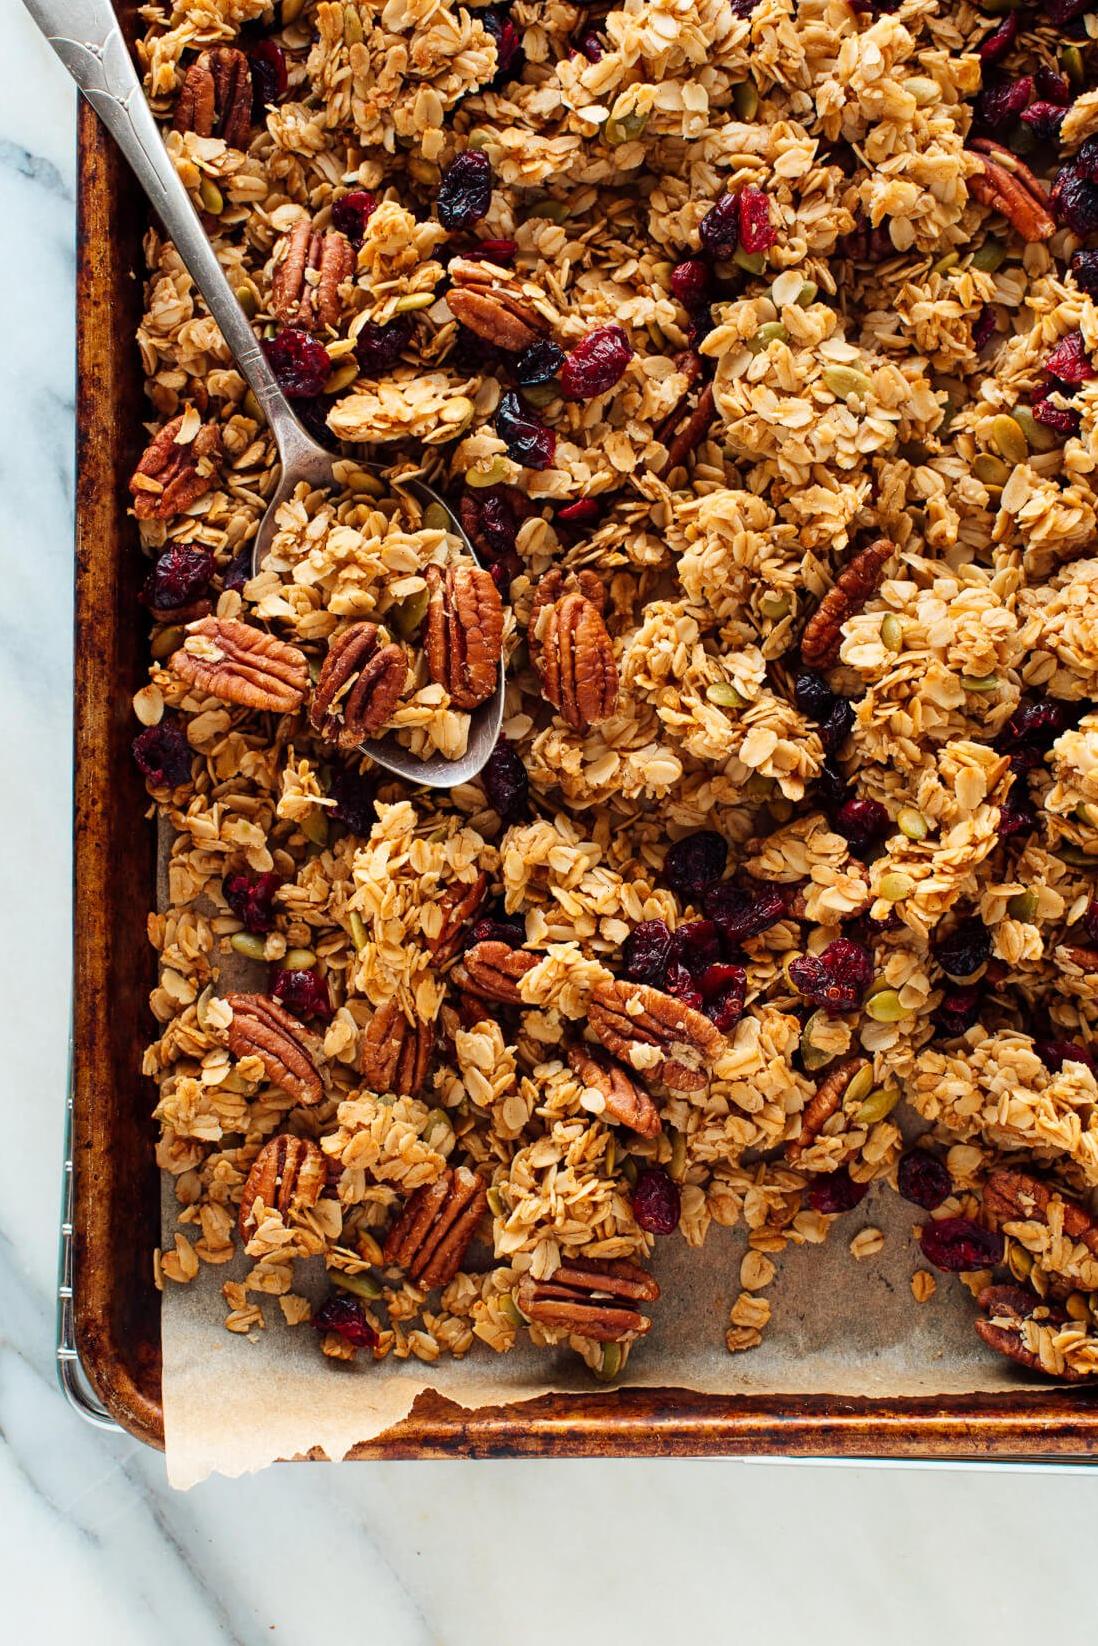  Wake up to a delicious and healthy breakfast with this gluten-free granola!